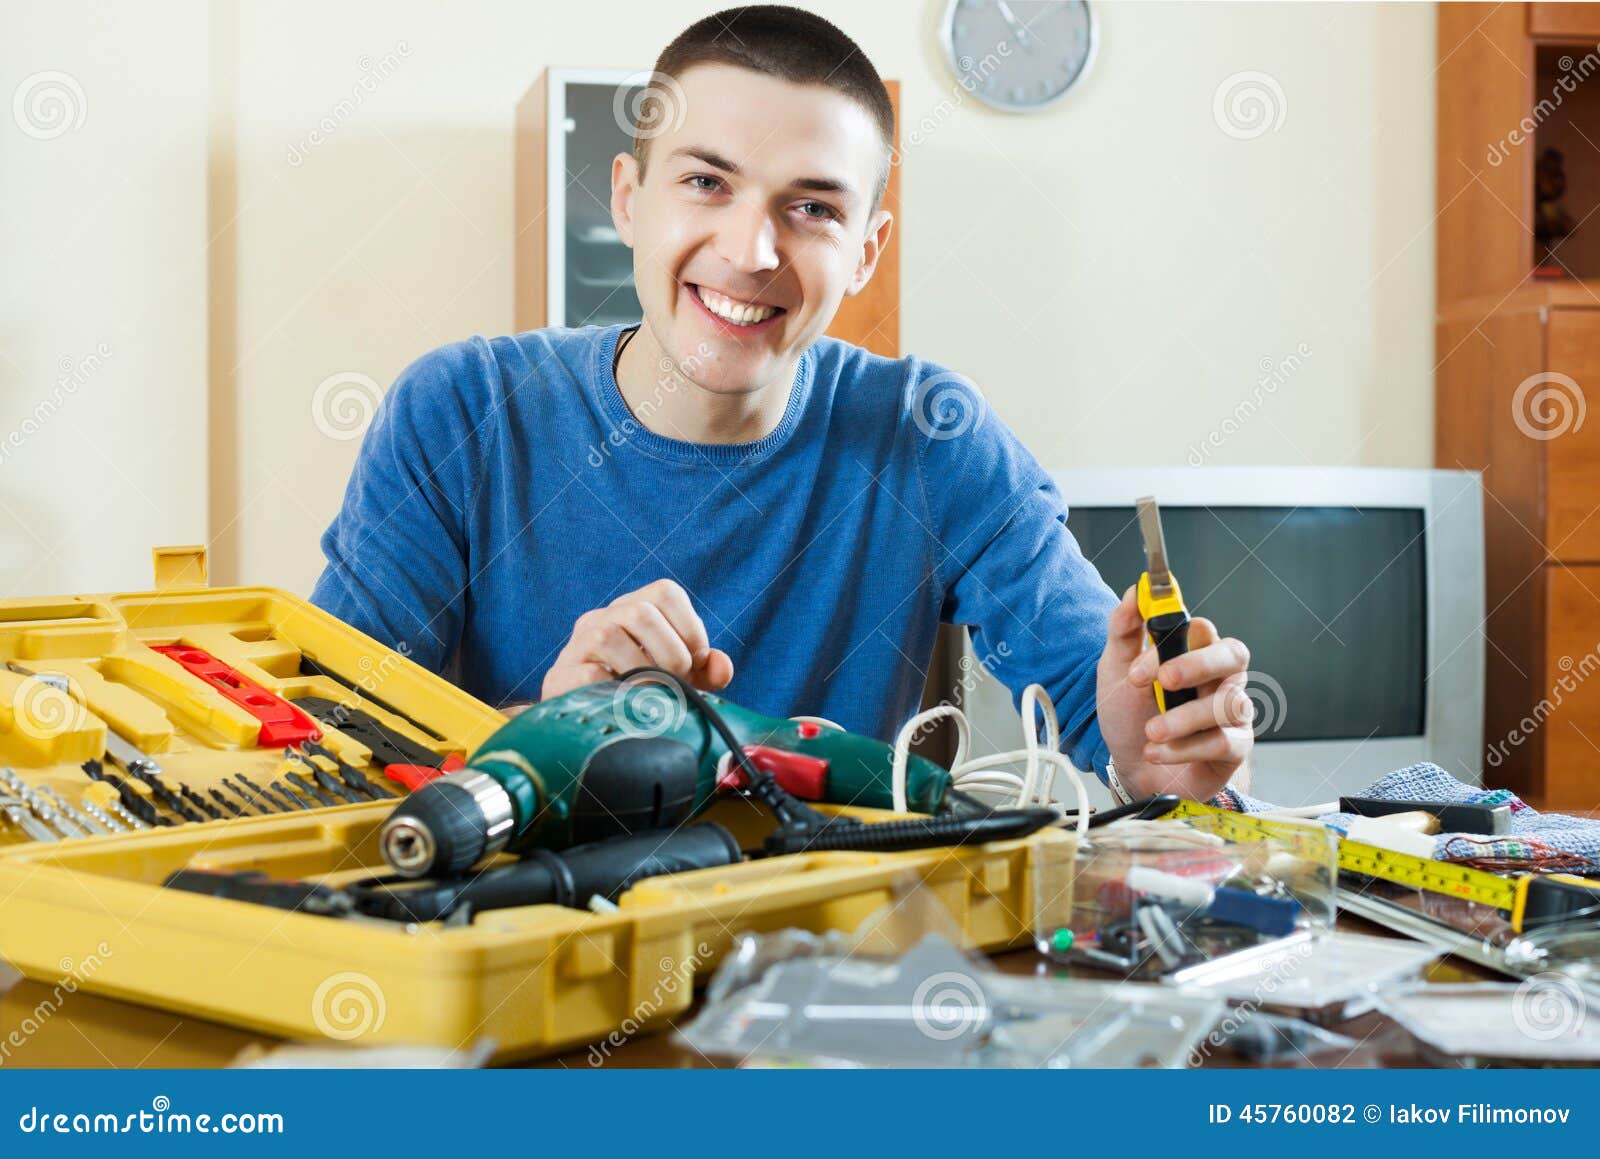 Man with working tools. Man doing something with working tools